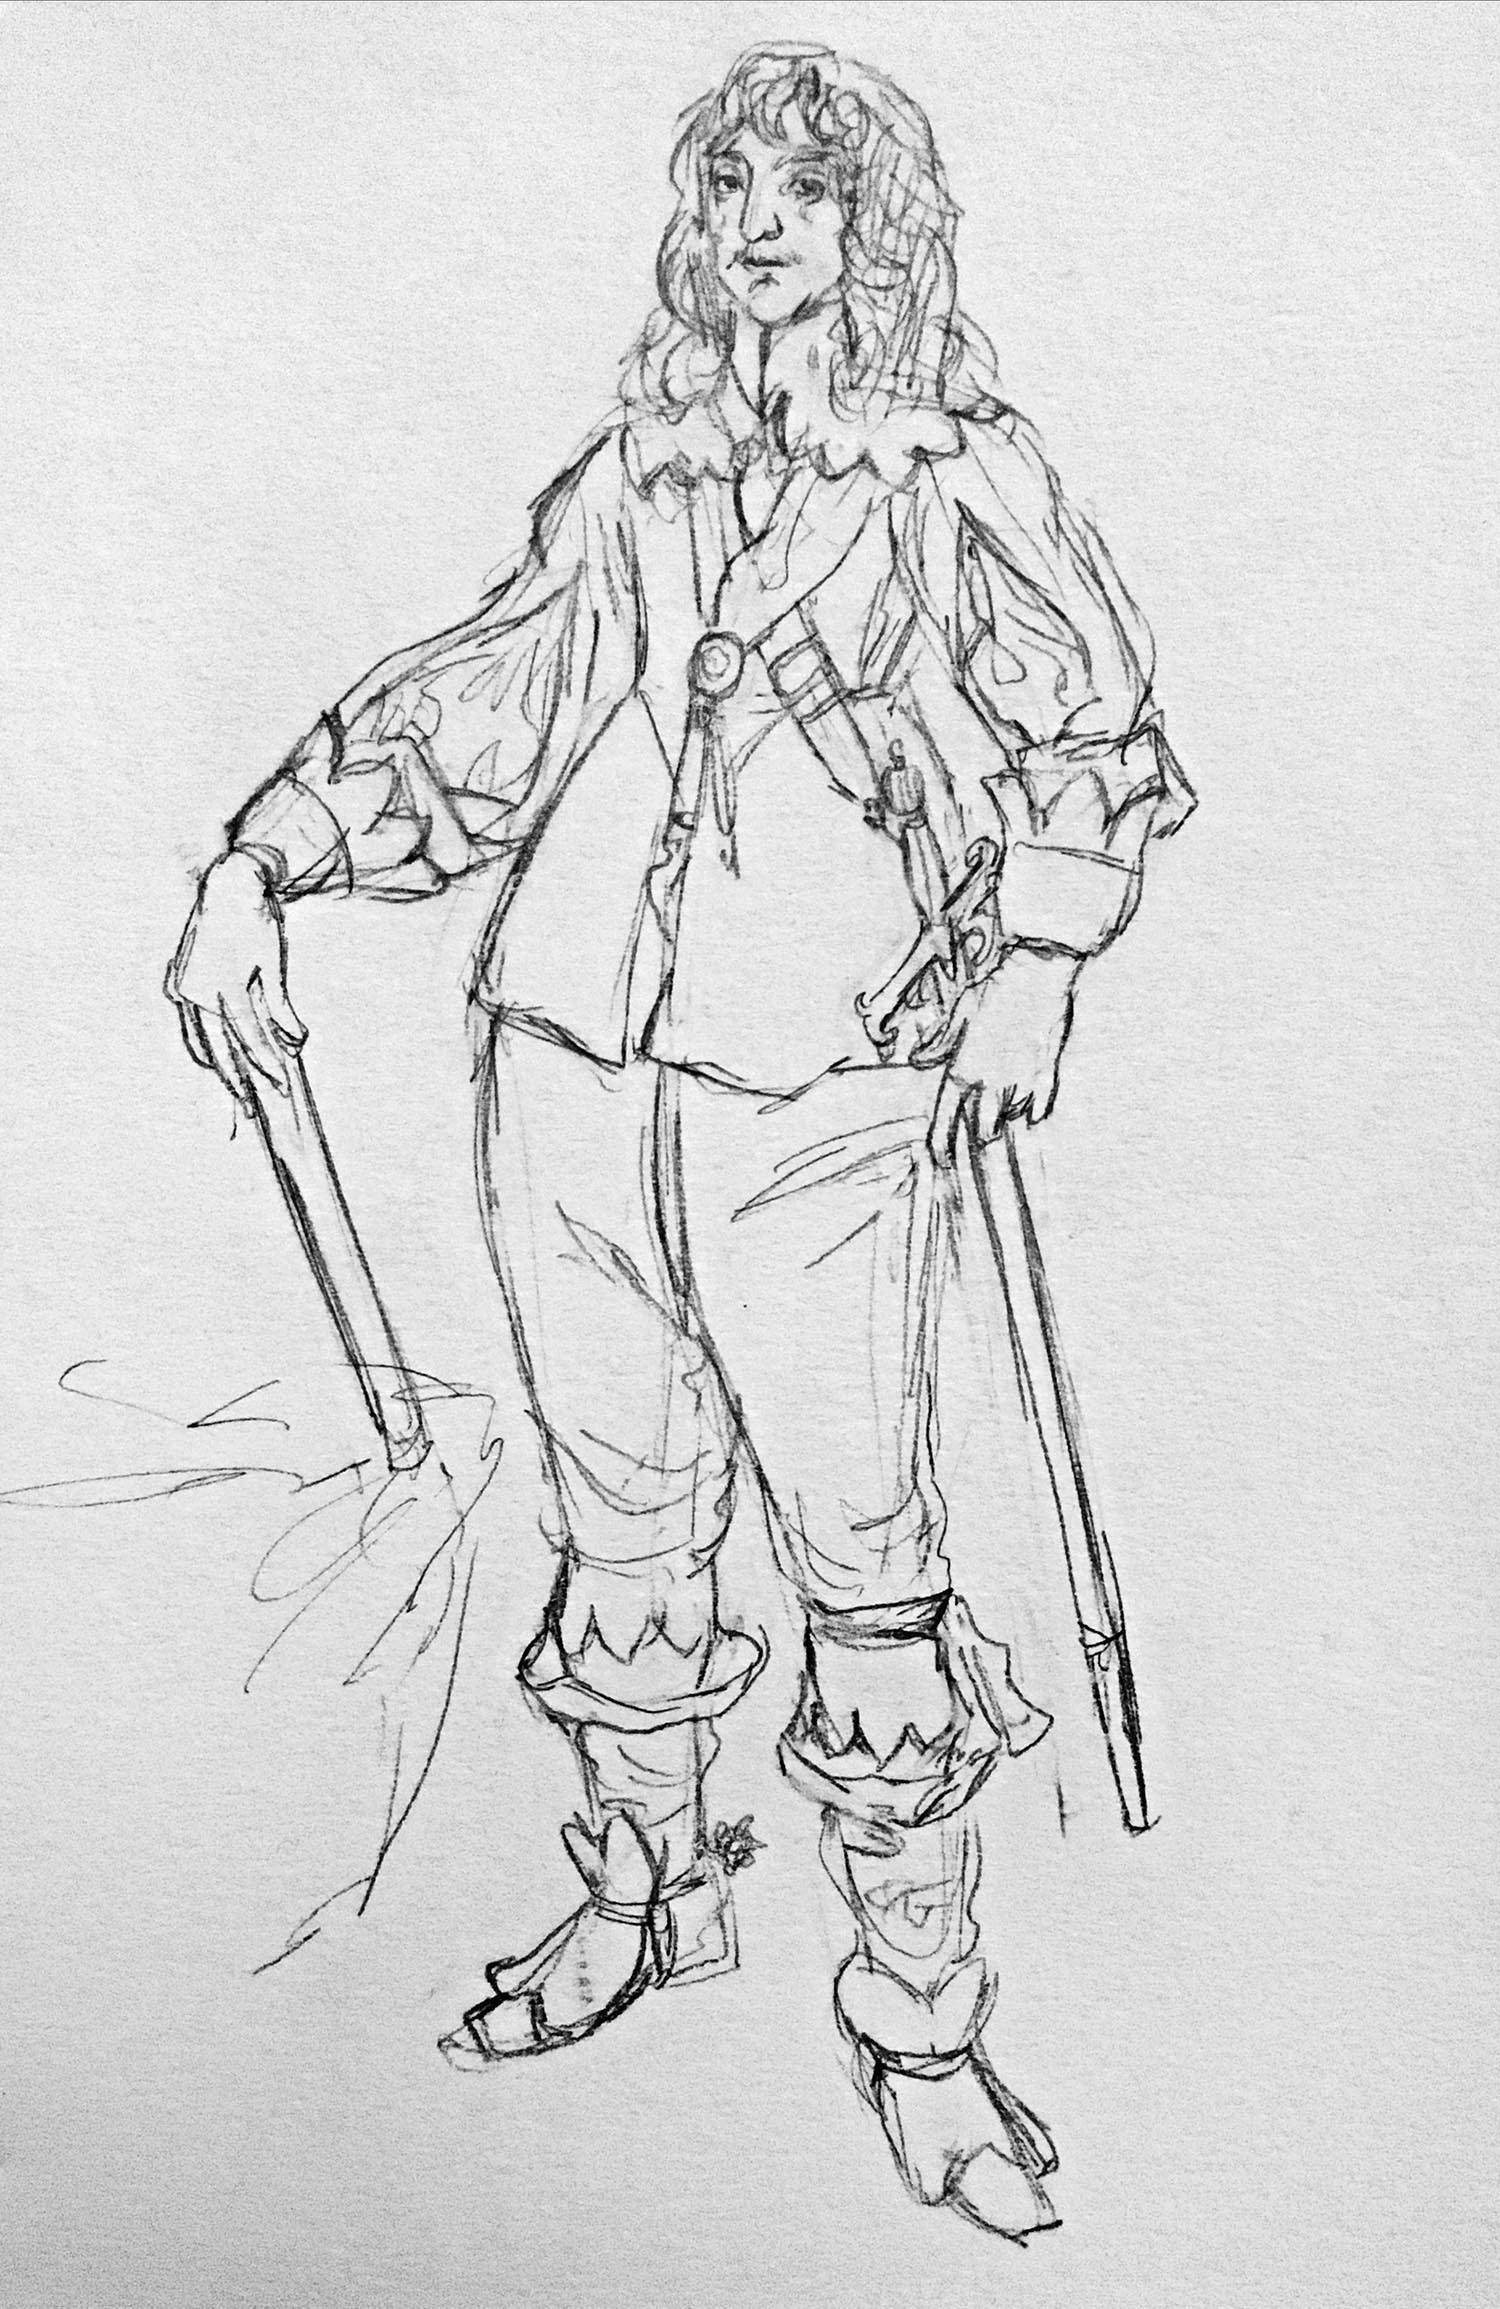 pencil sketch of man in 1600s clothes with sword, holding cane.